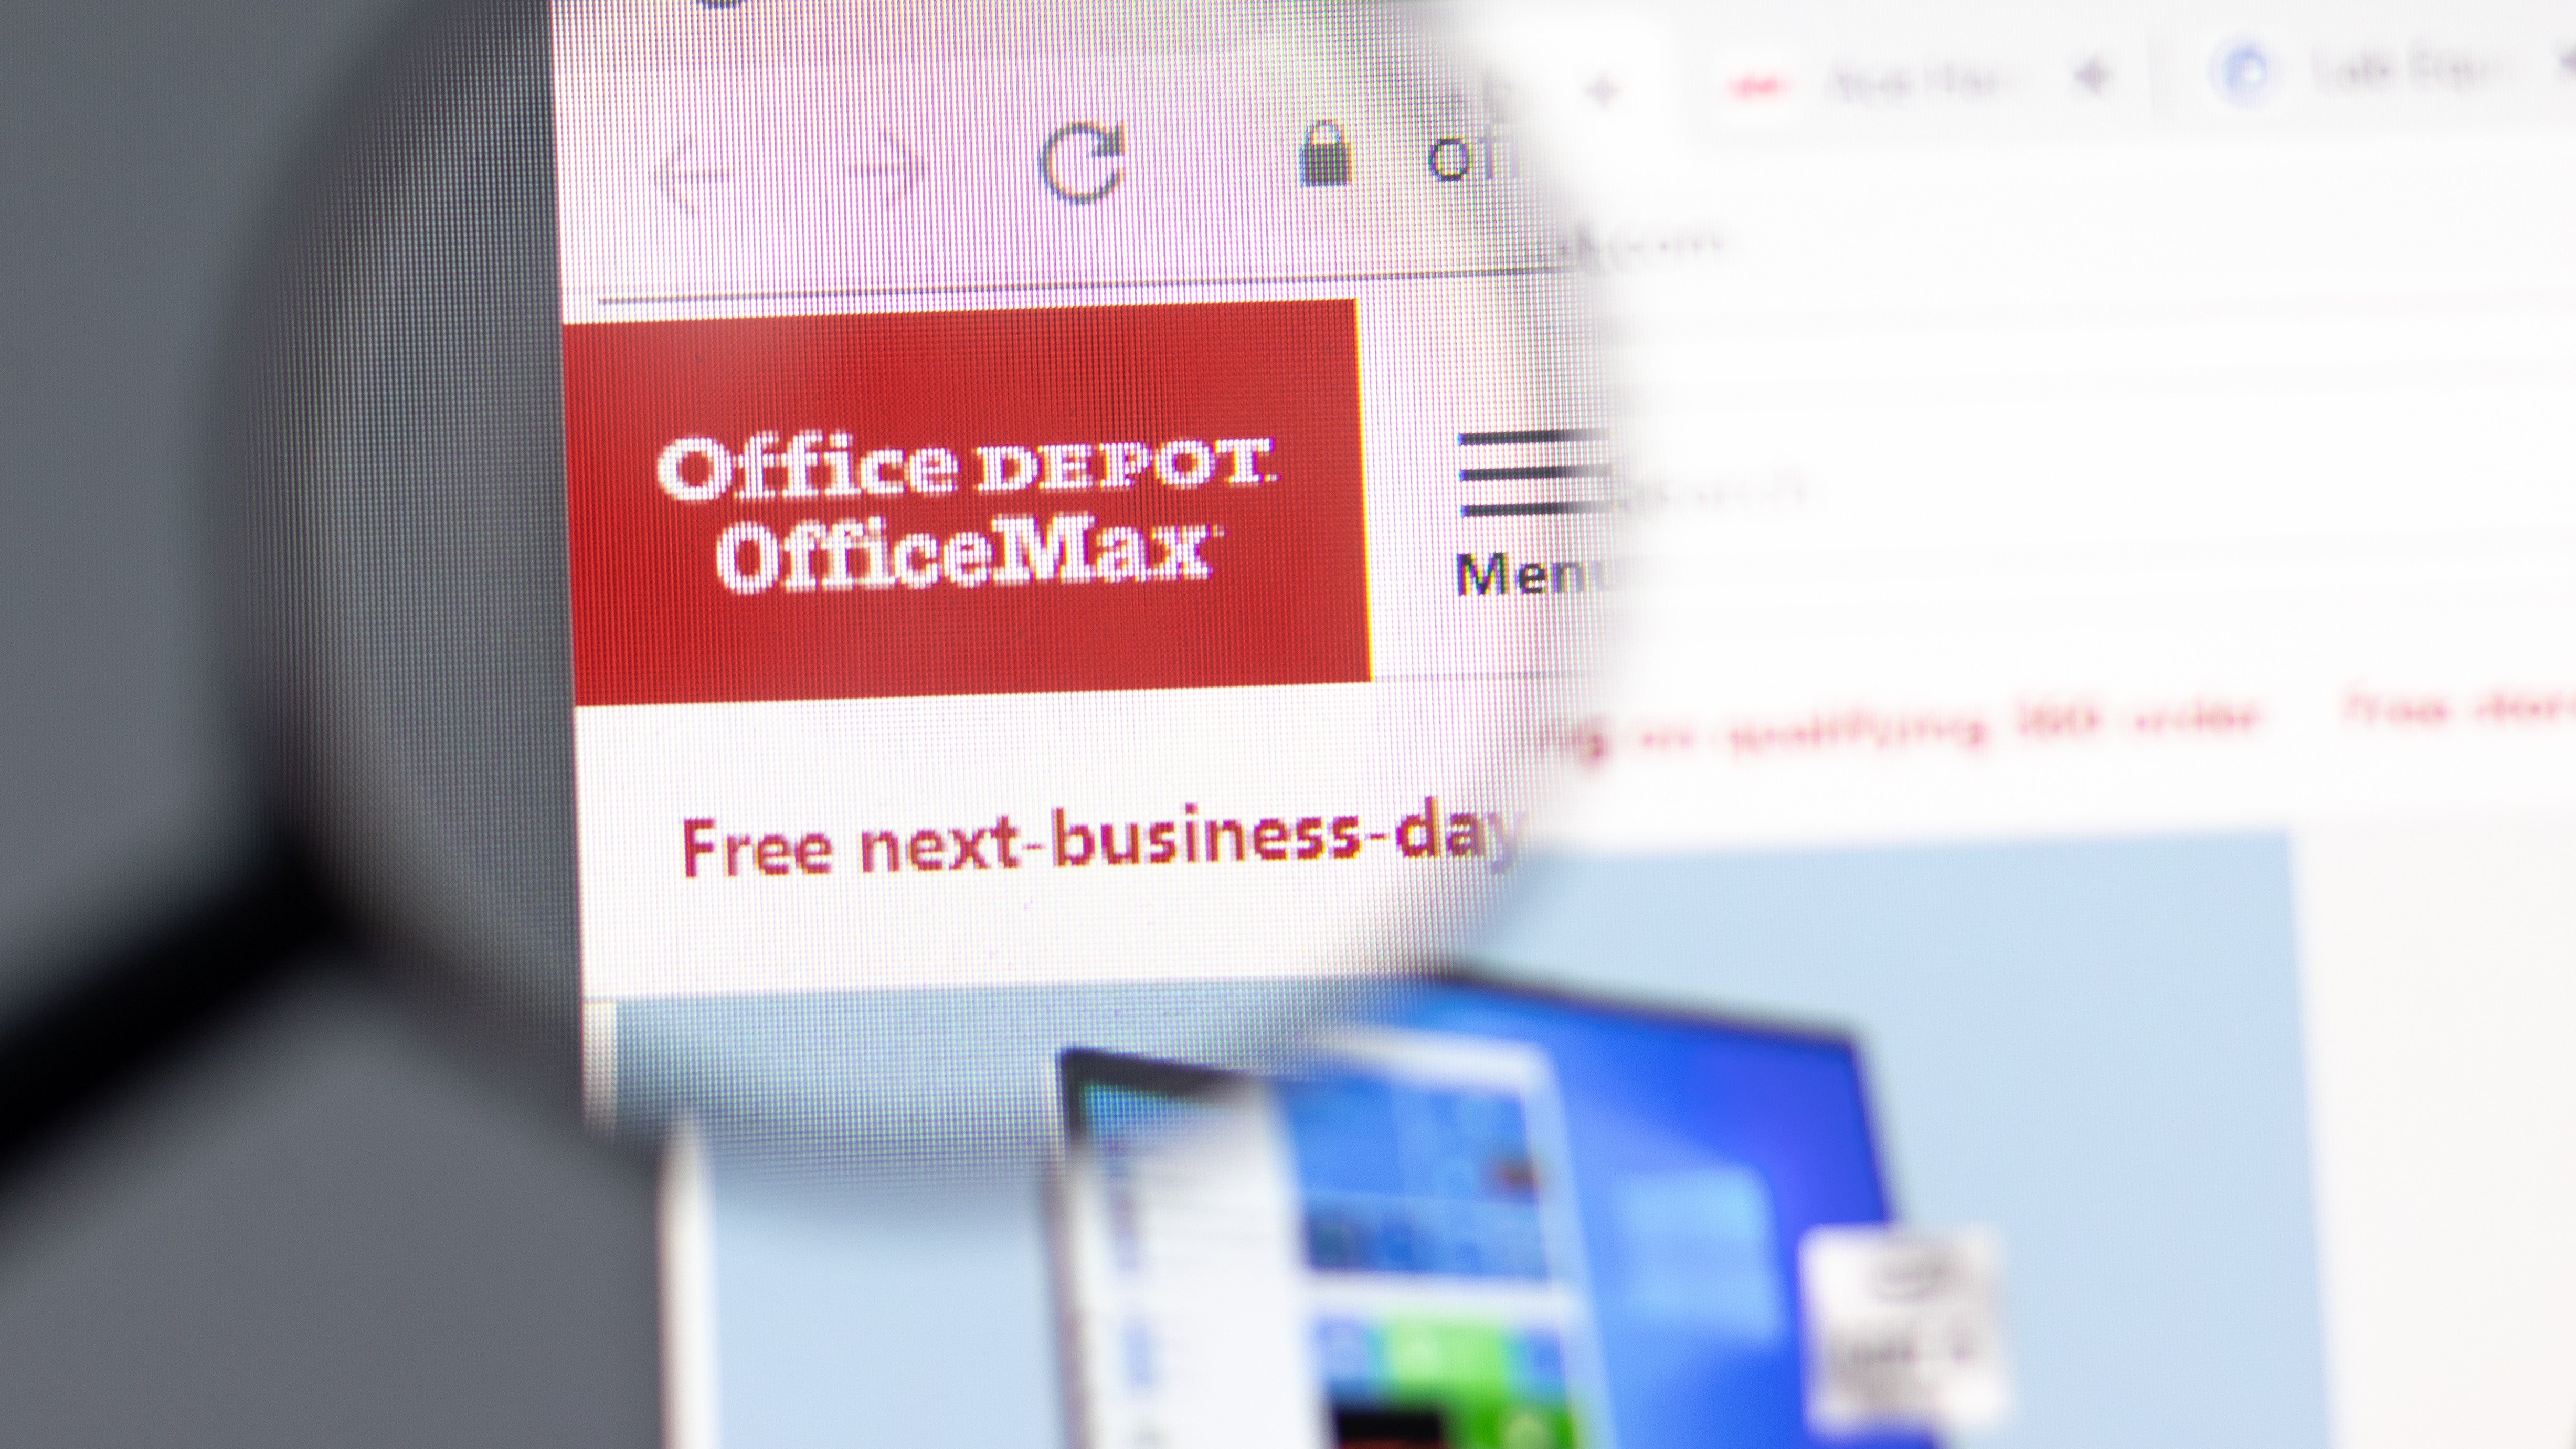 Numbers of Office Depot & OfficeMax in United States